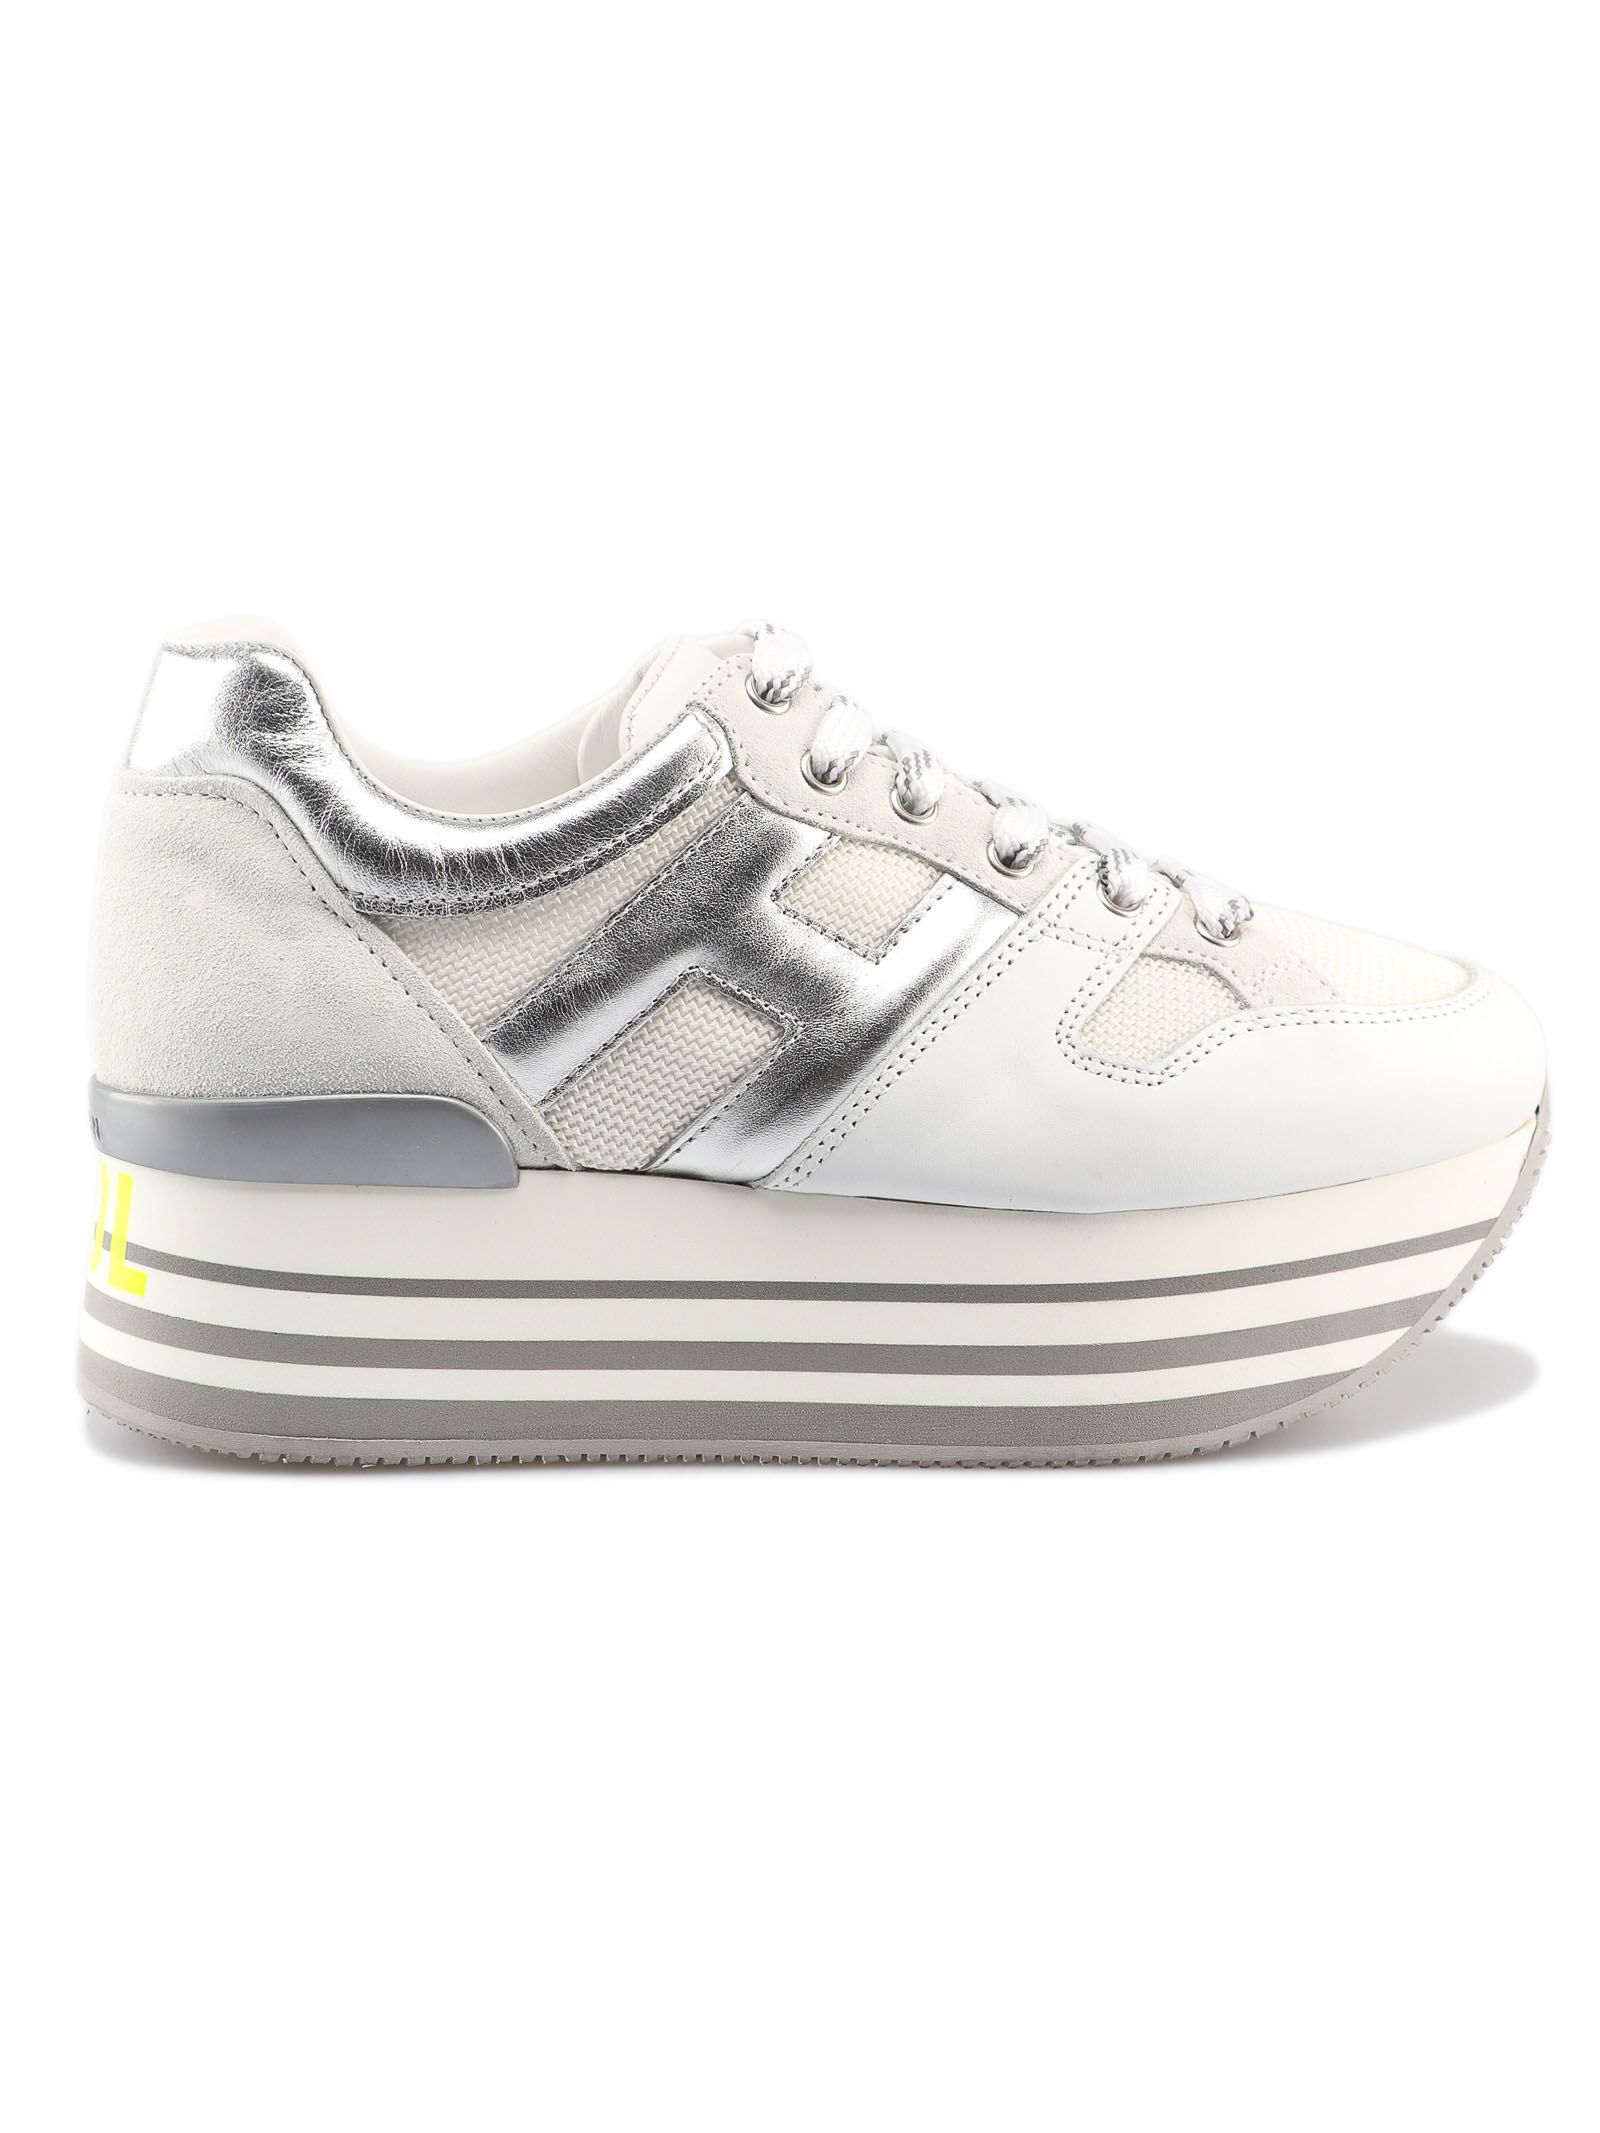 Hogan Max Stay Cool Platform Sneakers In Bianco Argento | ModeSens